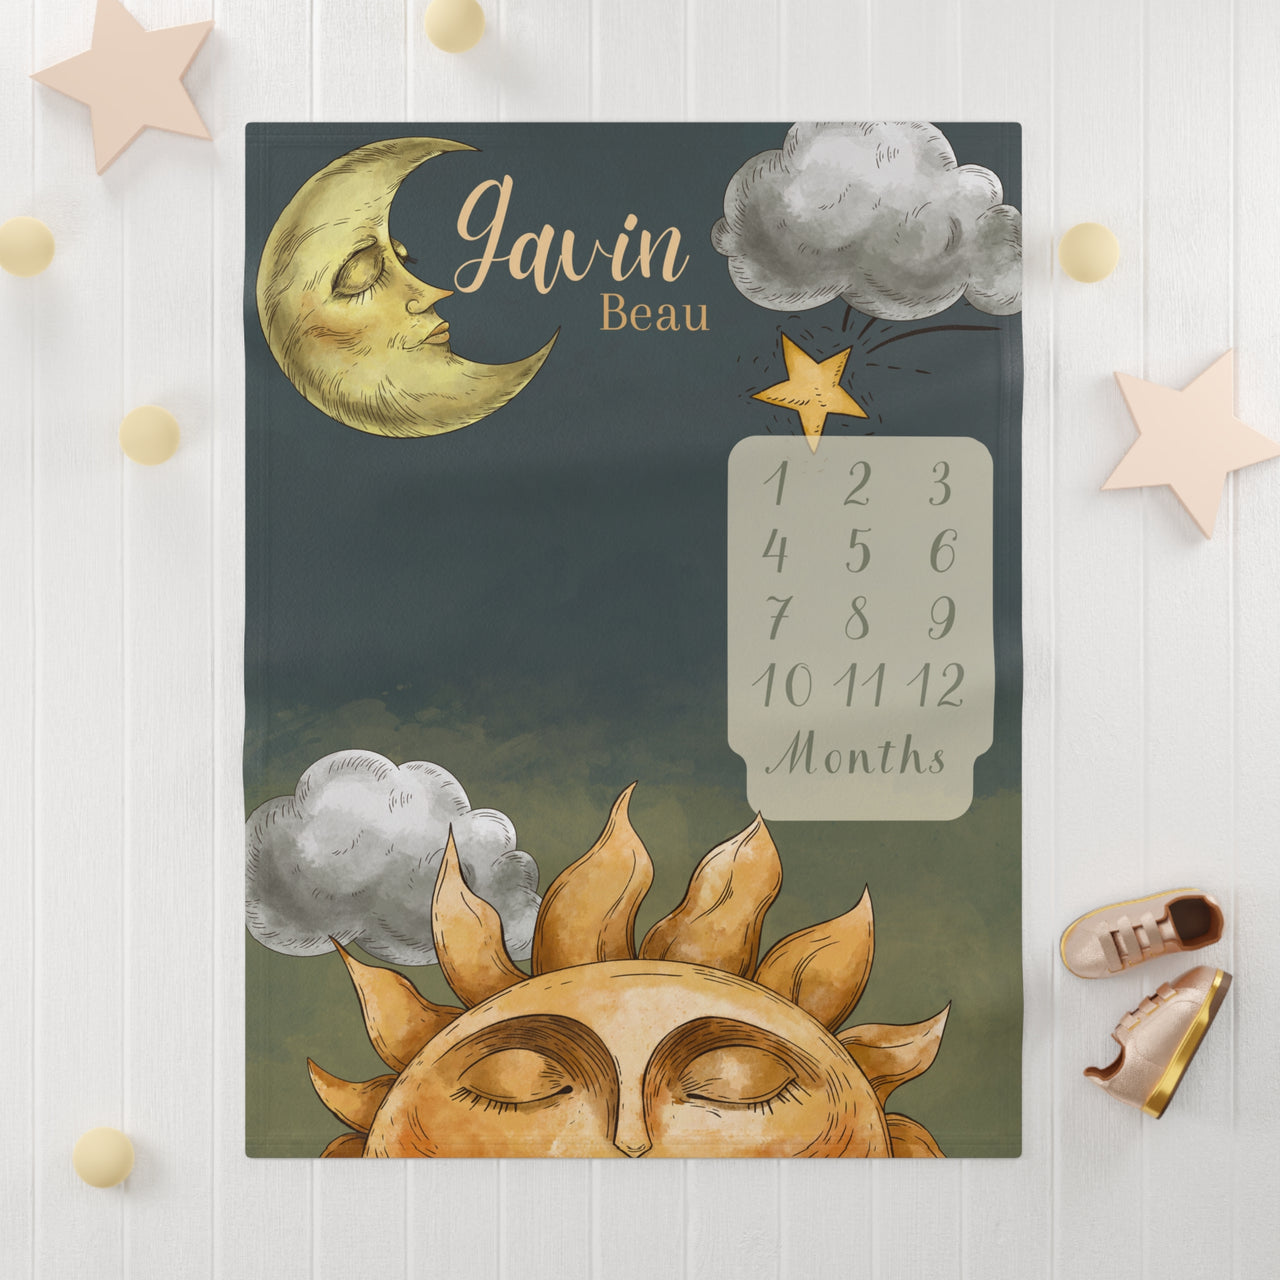 Sun and Moon Themed Soft Fleece Milestone Blanket, Boys Monthly Growth Tracker, Personalized Baby Blanket, Baby Shower Gift